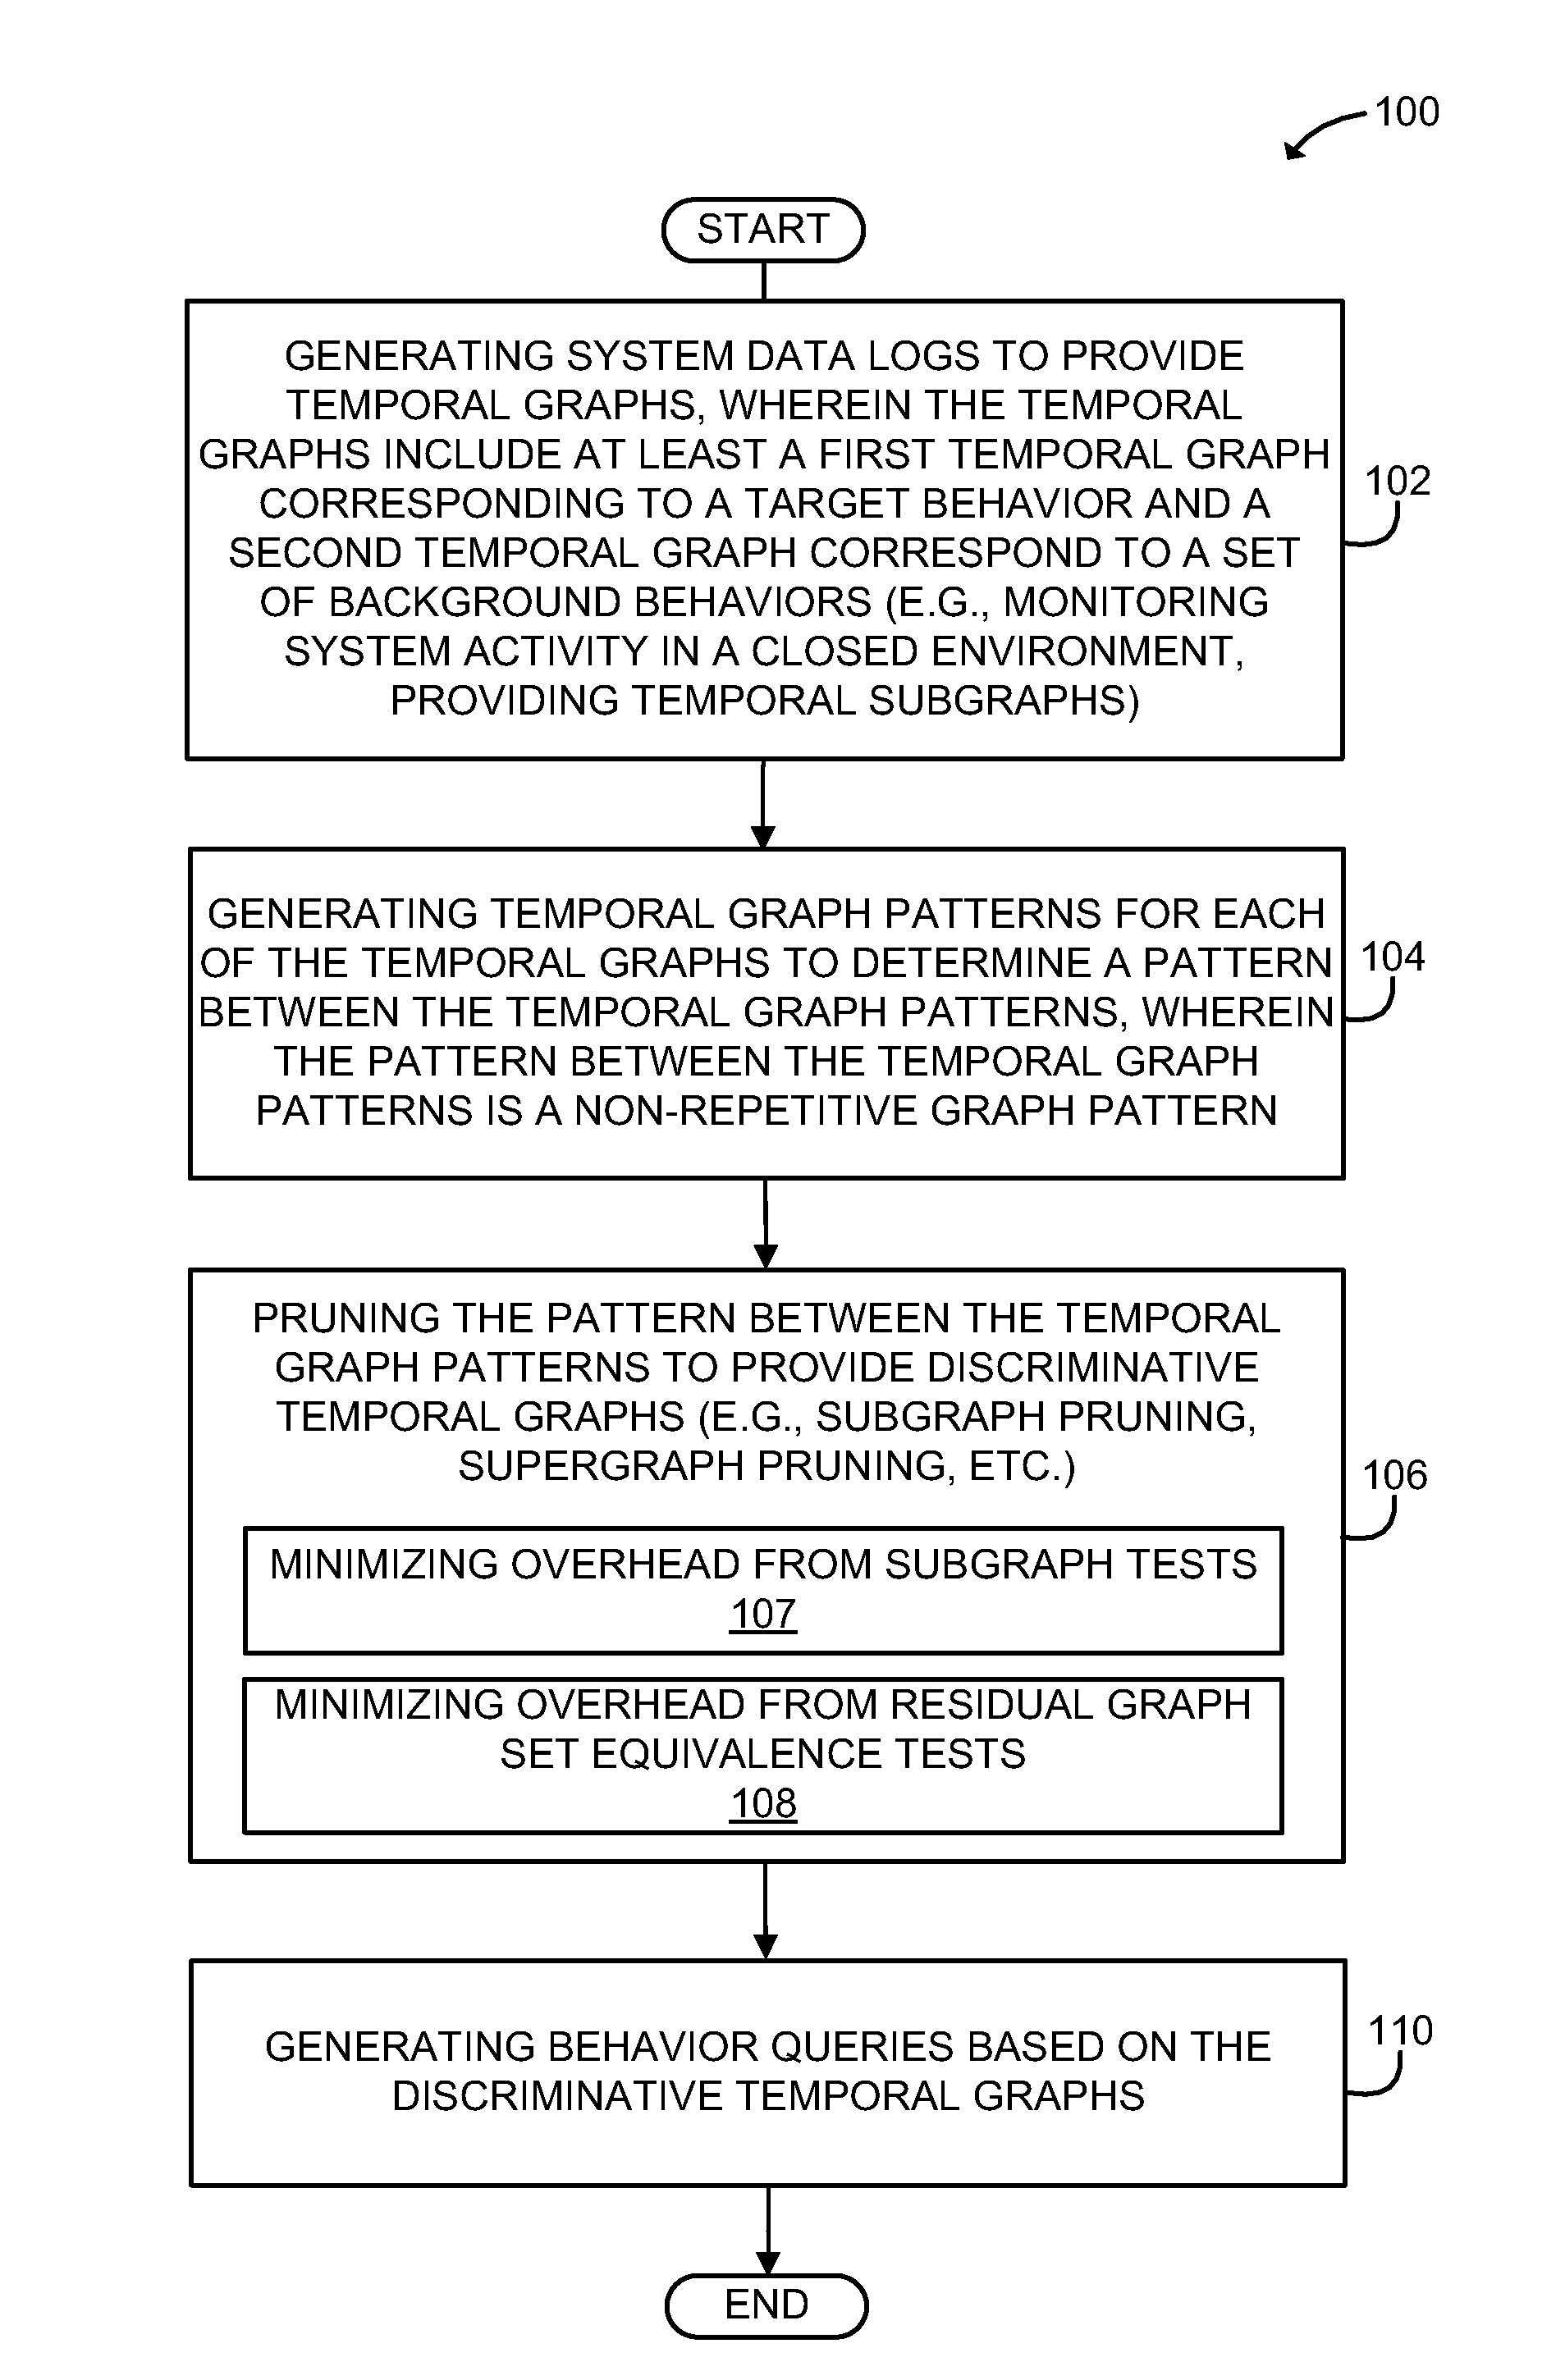 Method and system for behavior query construction in temporal graphs using discriminative sub-trace mining